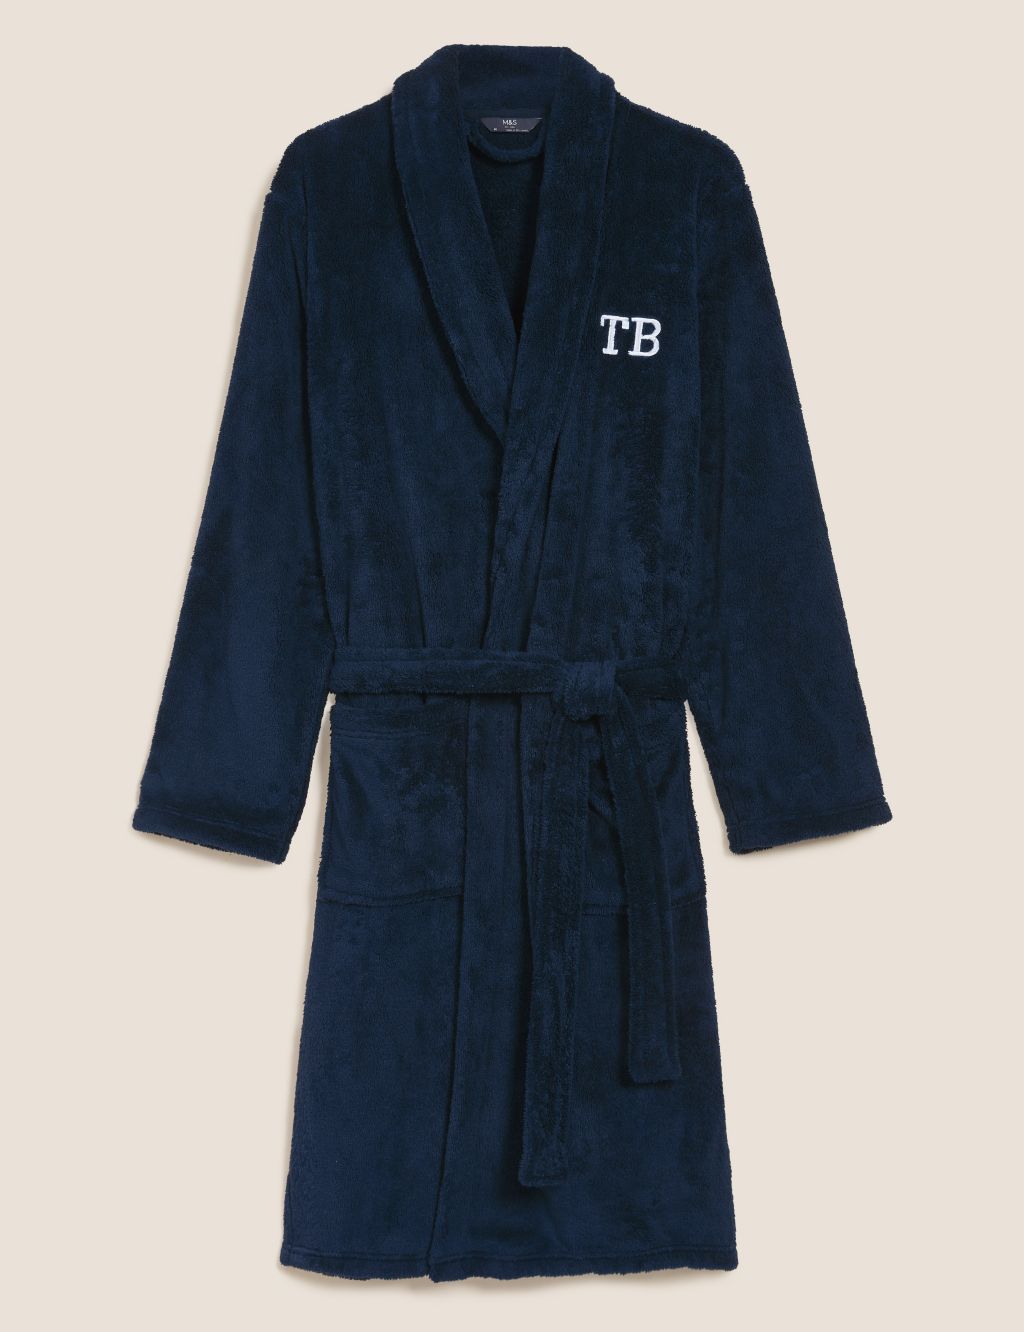 Personalised Men's Supersoft Dressing Gown image 1